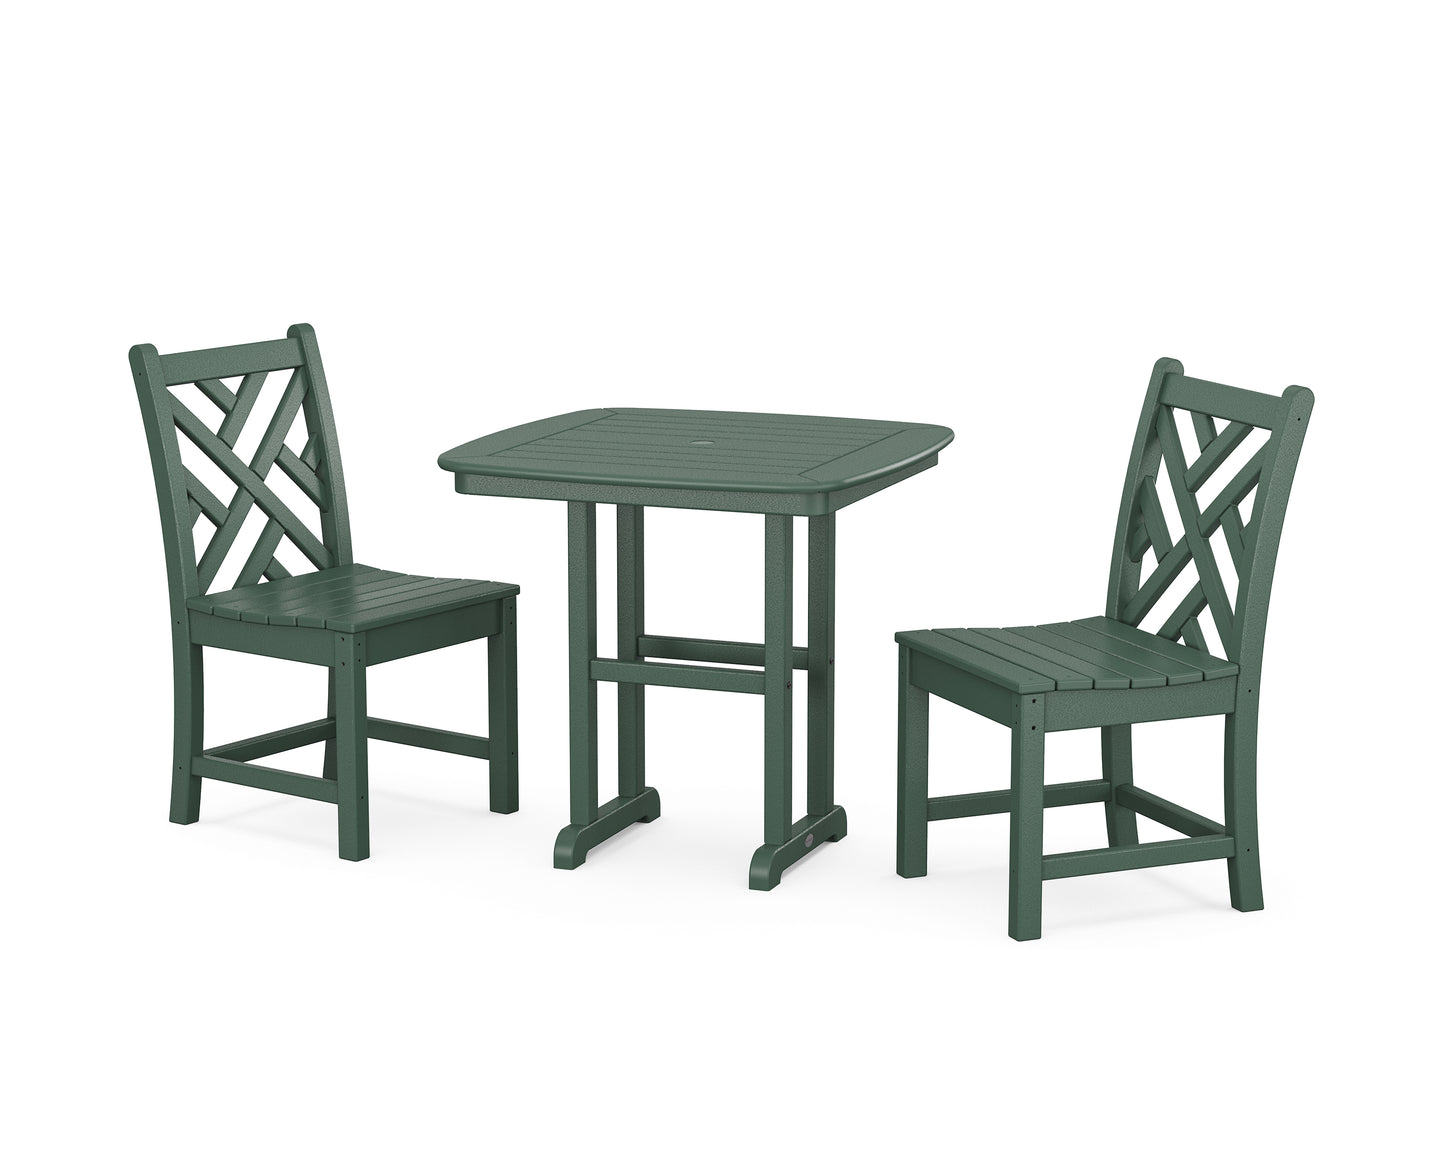 Chippendale Side Chair 3-Piece Dining Set